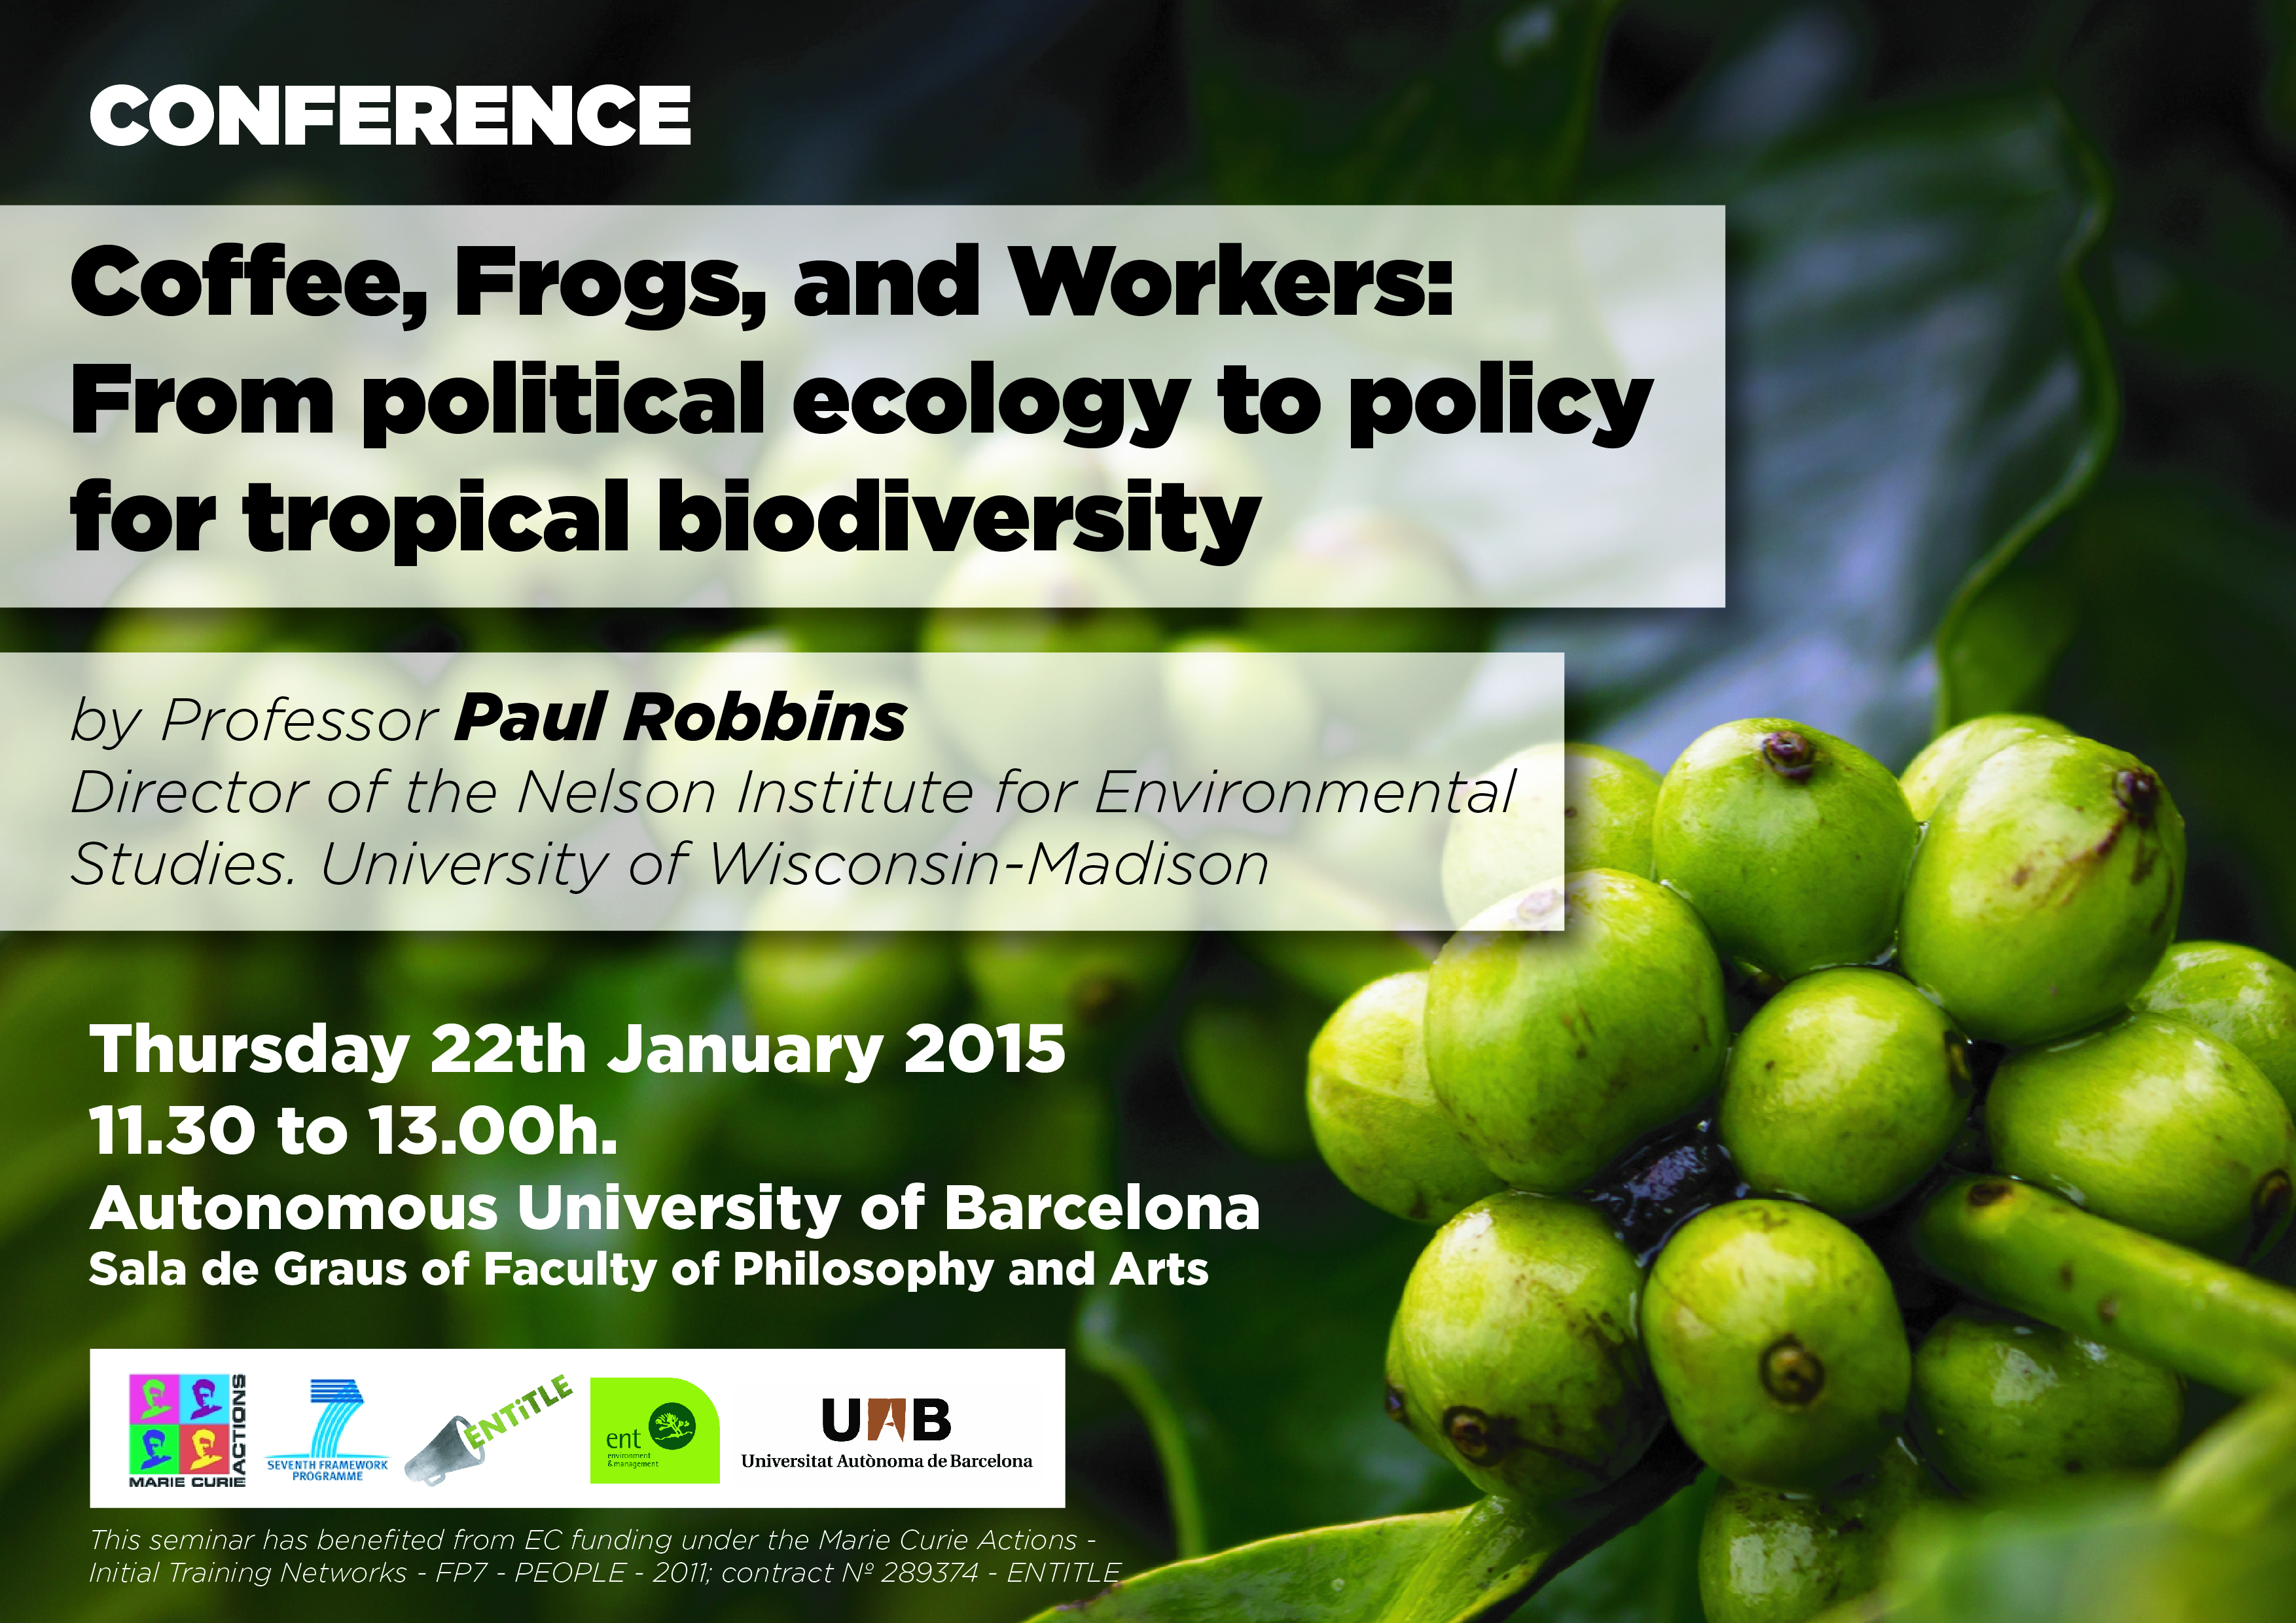 Can frogs and workers unite? Paul Robbins on conserving biodiversity in the Western Ghats, India